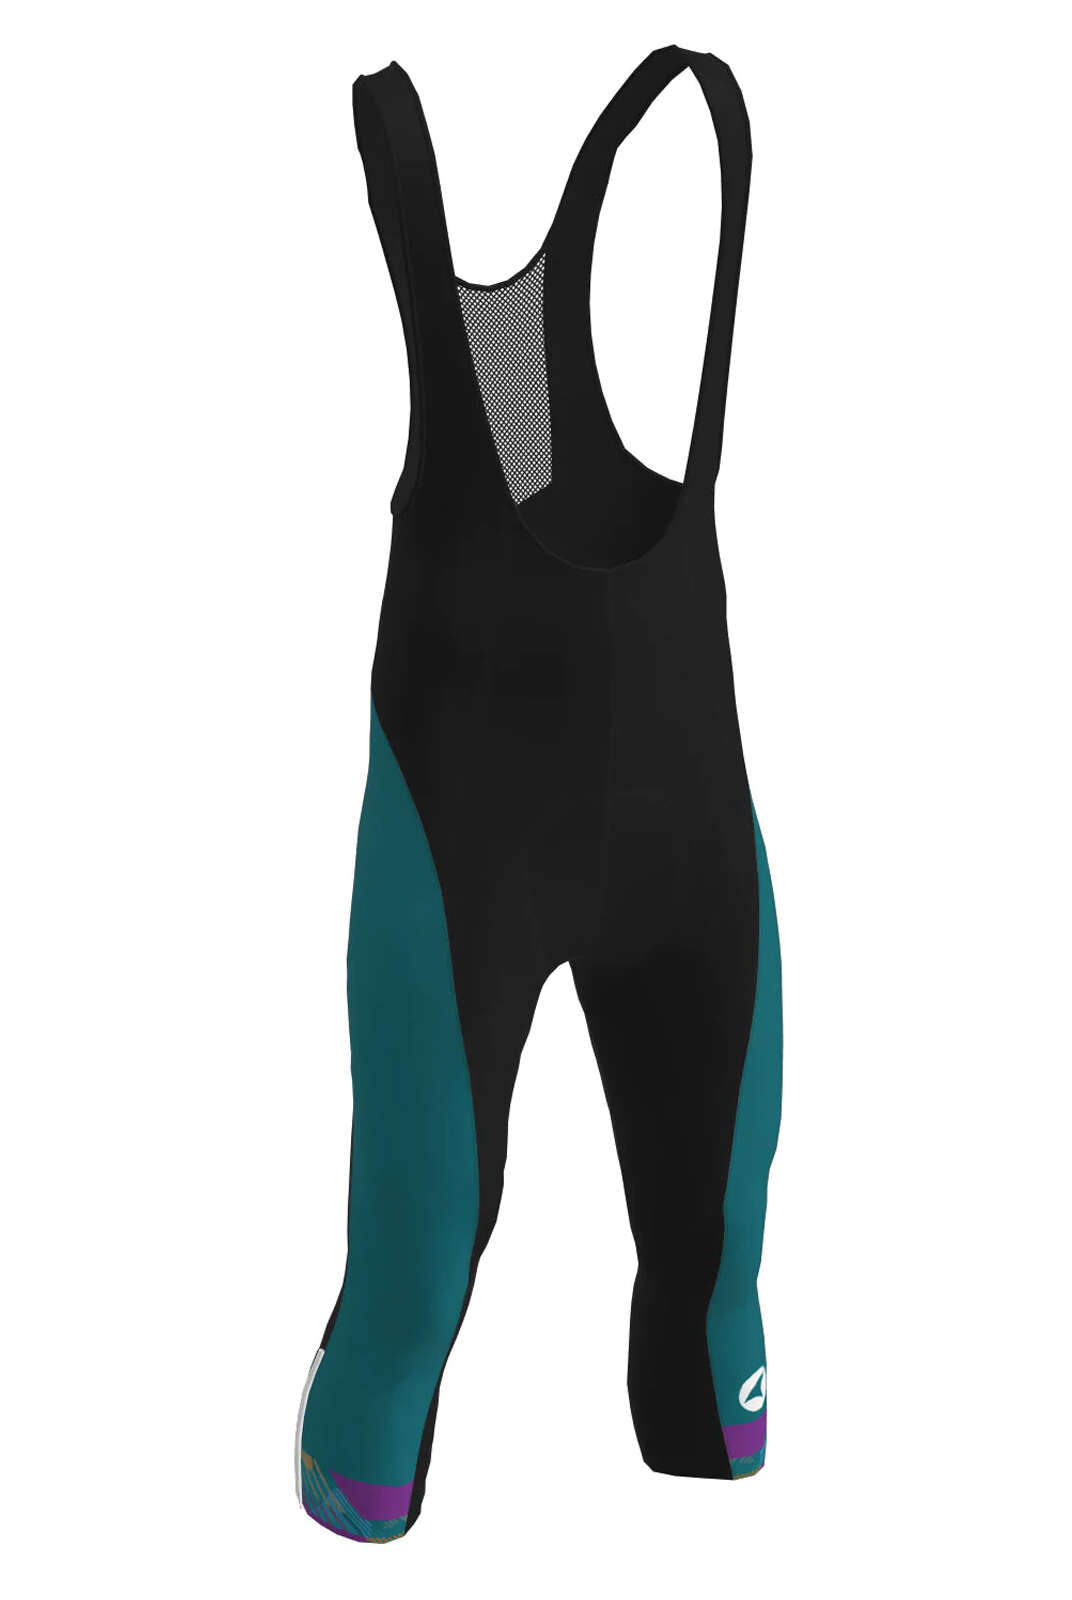 Men's Custom Thermal 3/4 Bib Tights - Ouray Front View